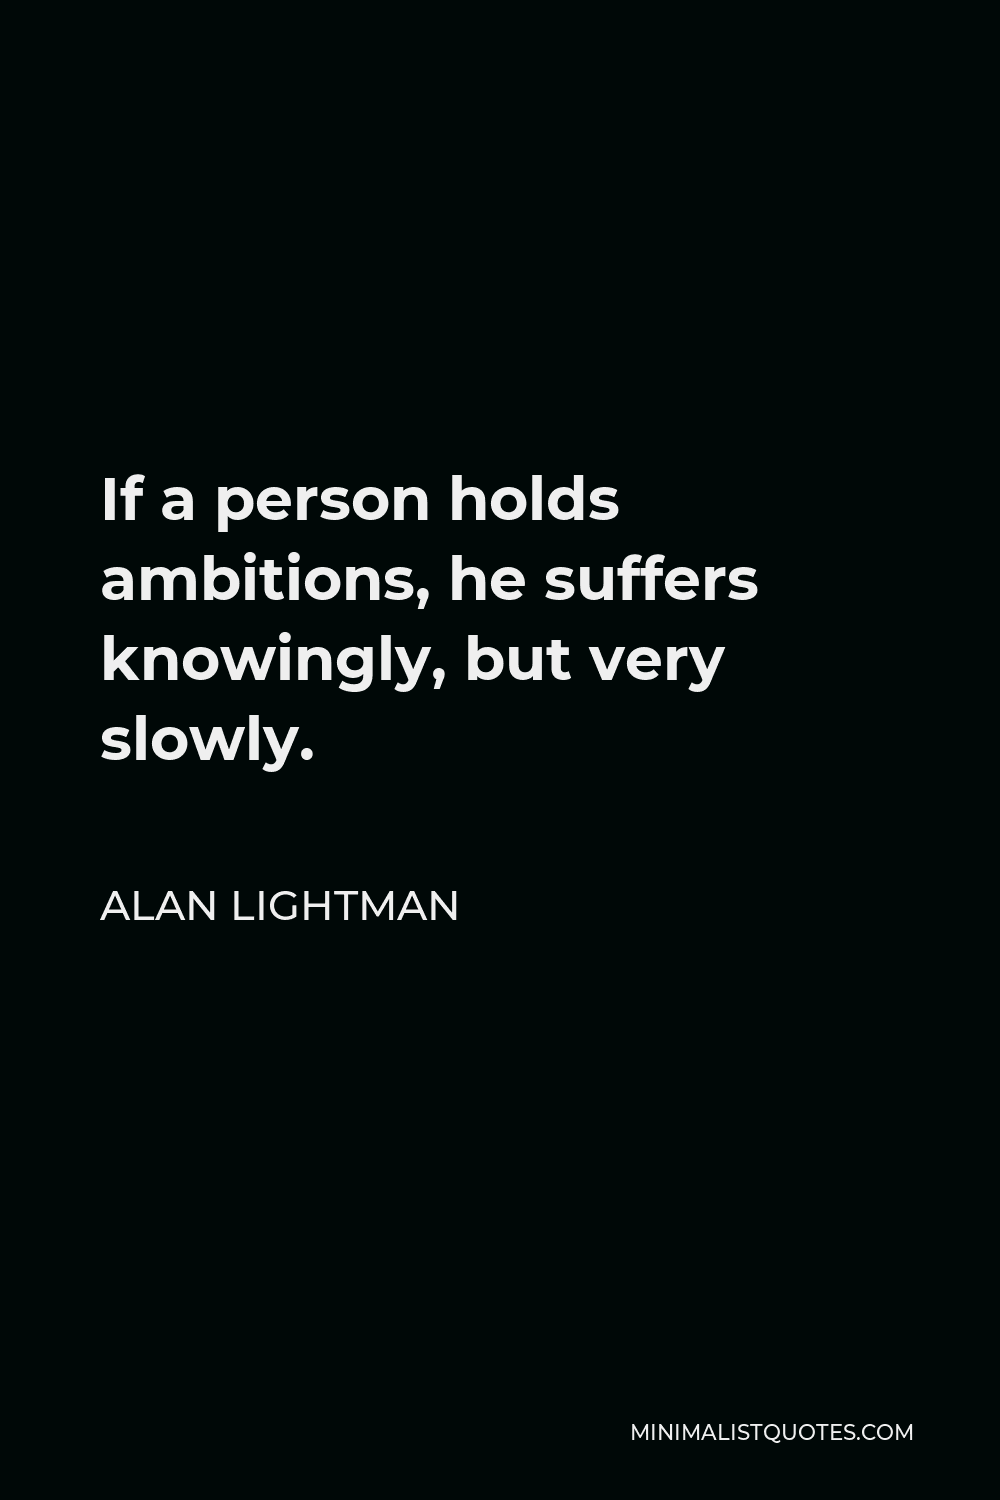 Alan Lightman Quote - If a person holds ambitions, he suffers knowingly, but very slowly.